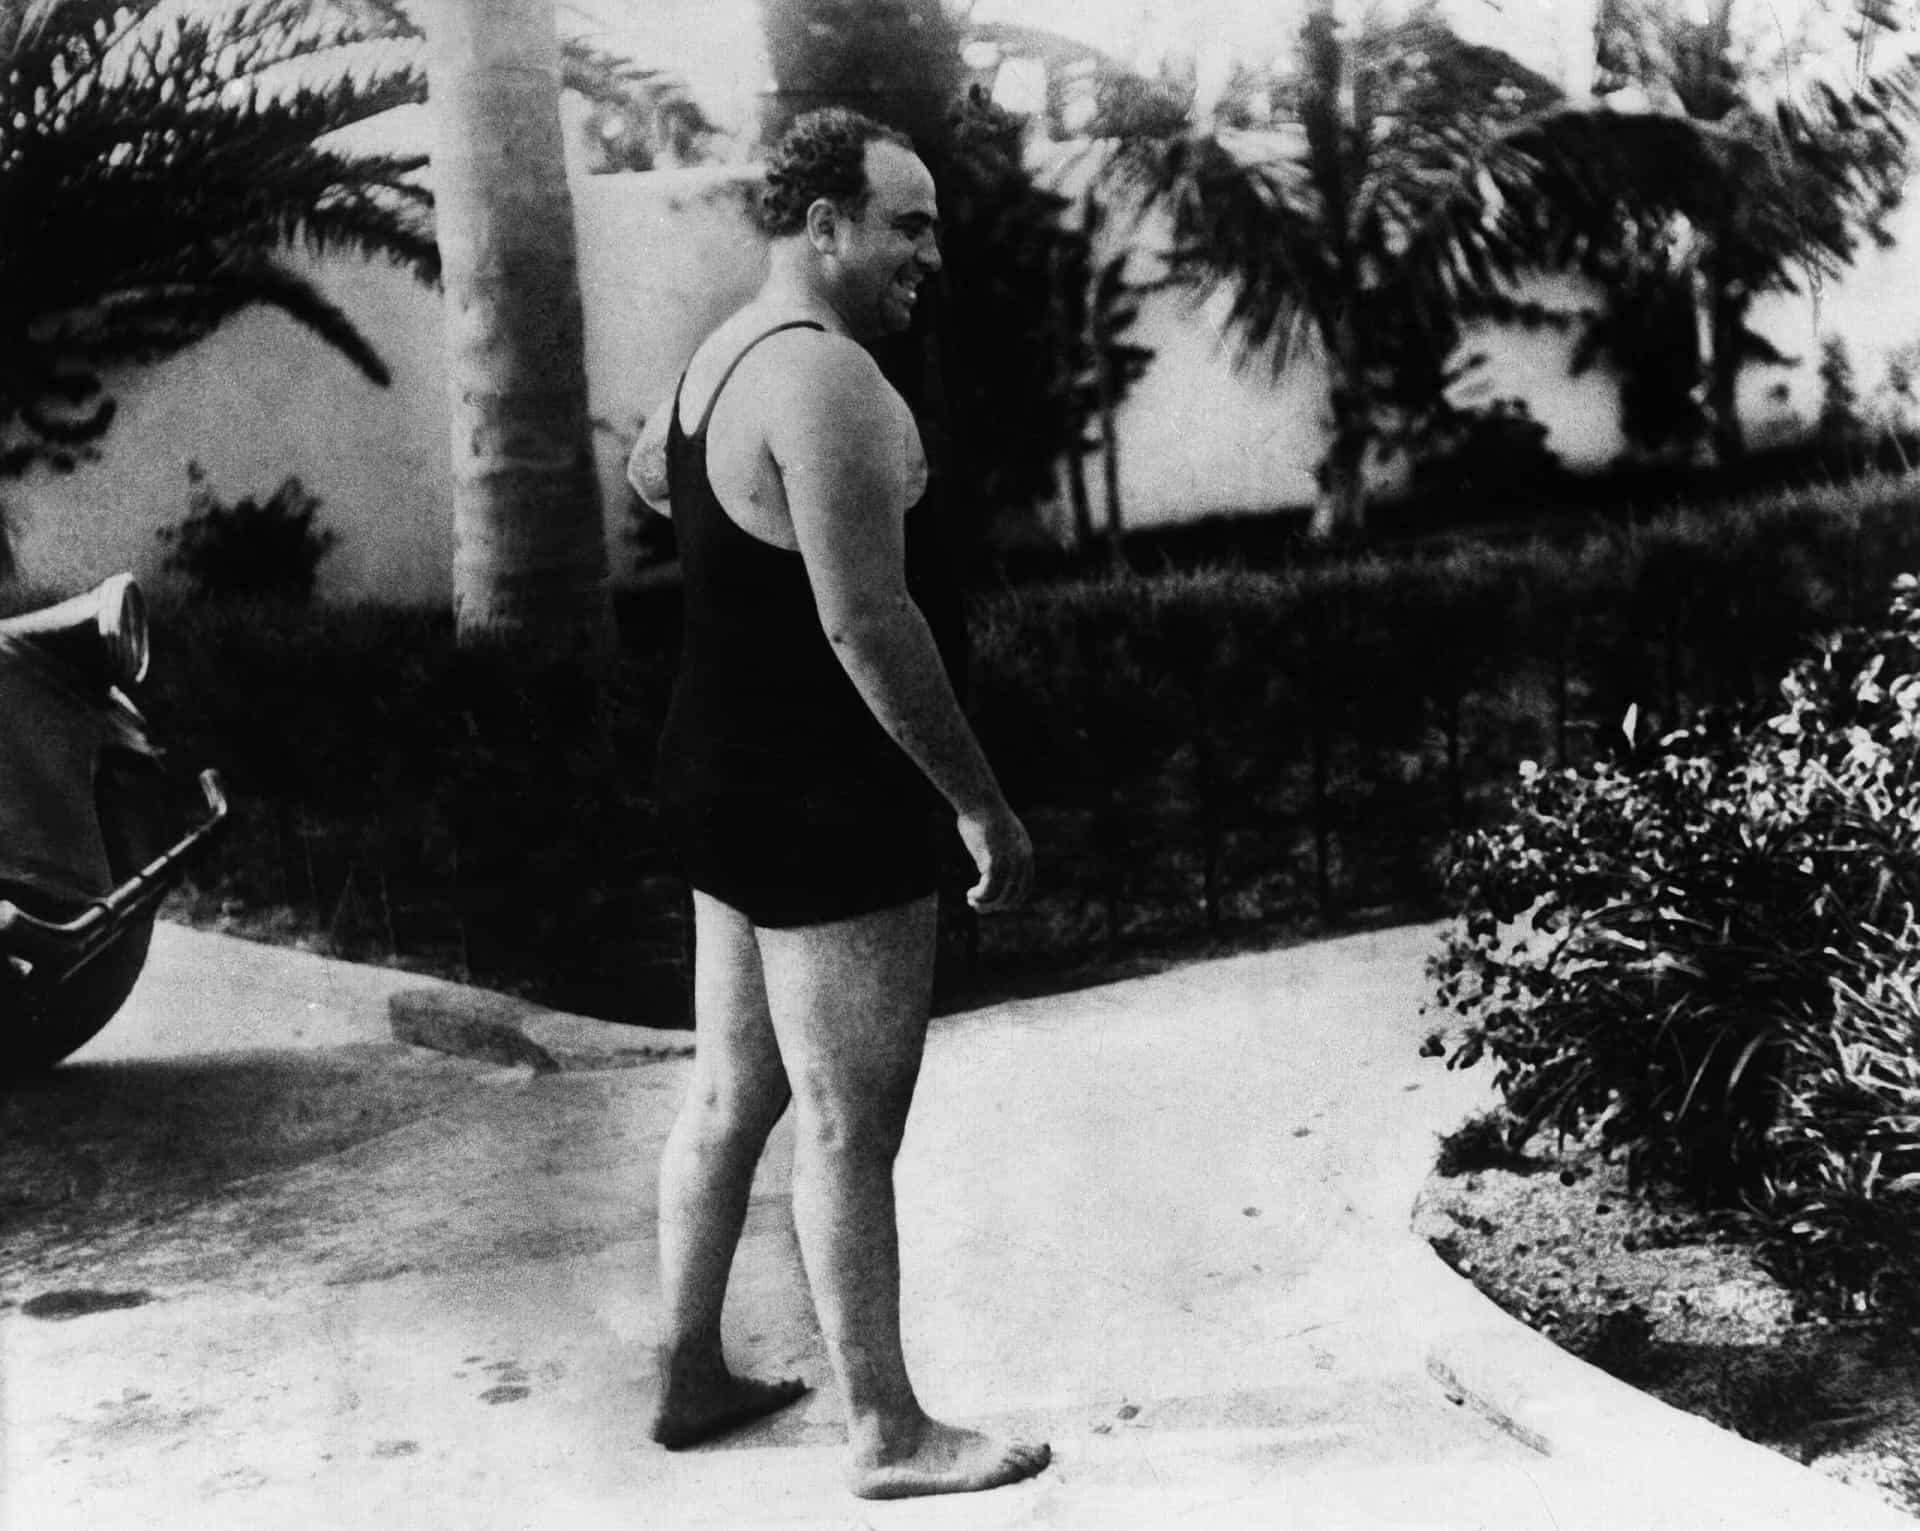 <p>Capone is pictured in a bathing suit during one of his many Florida sojourns.</p>